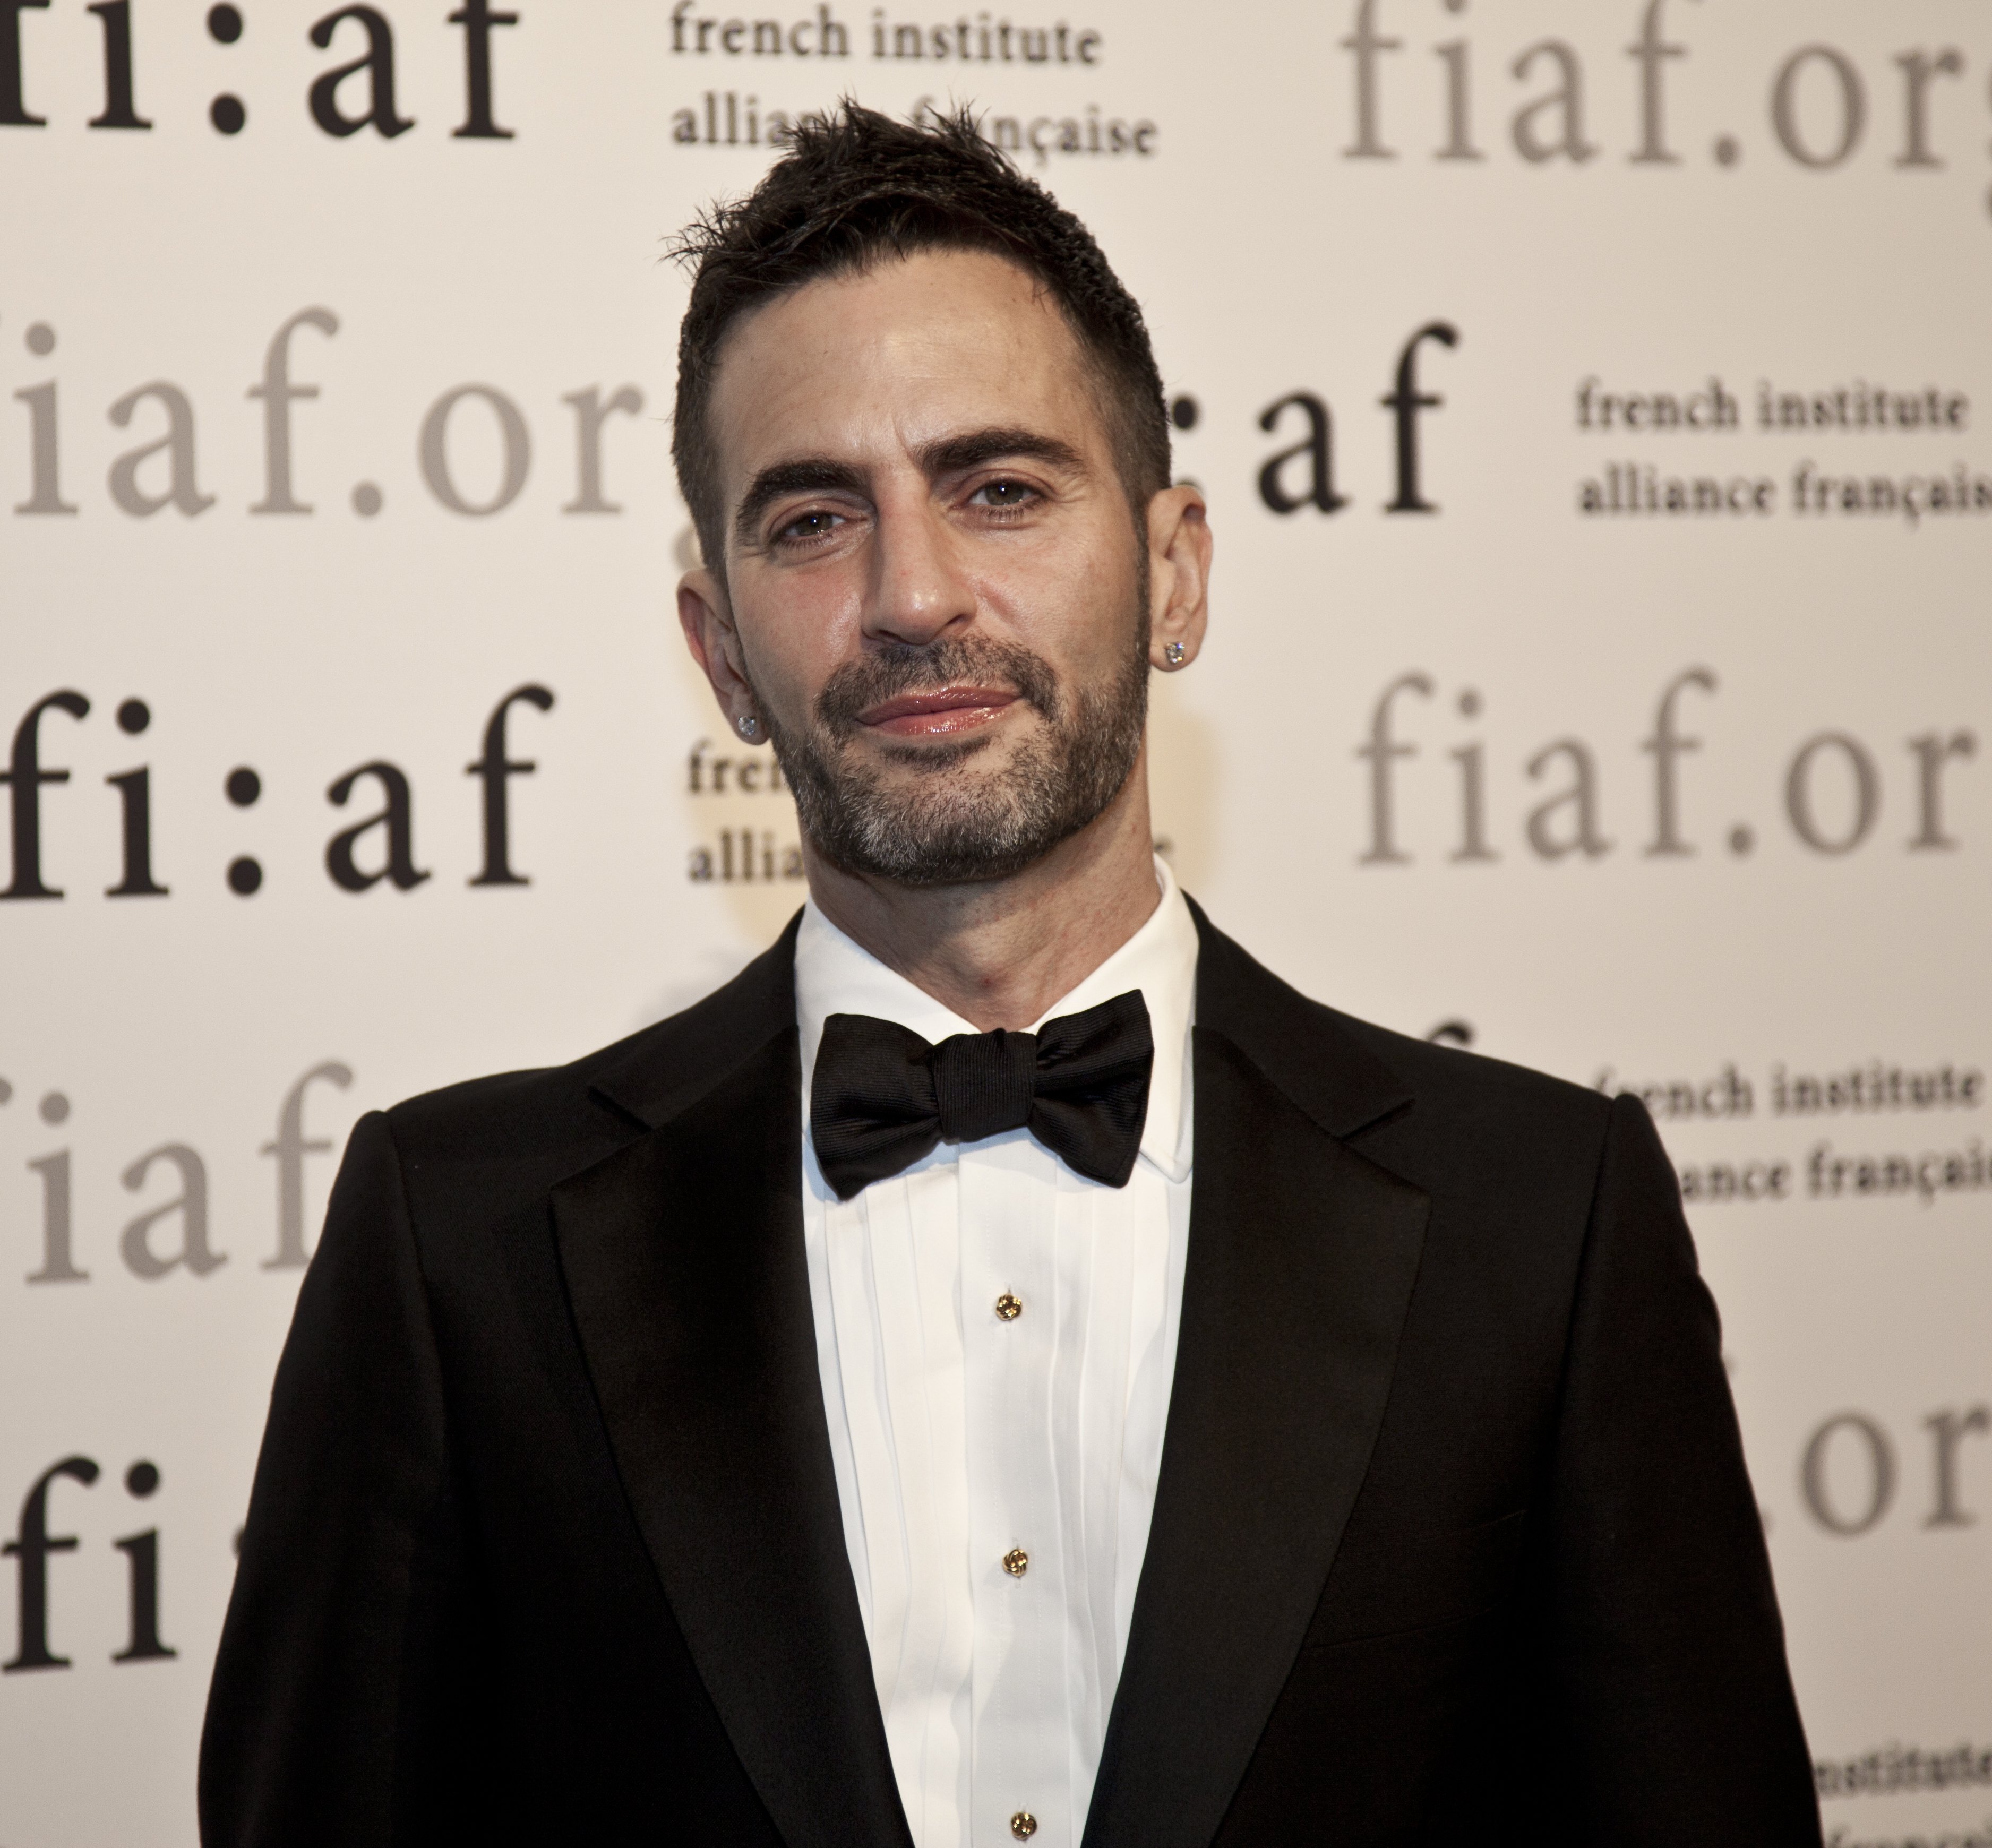 Fashion designer Marc Jacobs arrives at the 2010 FIAF Trophee des Arts presentation at the Plaza hotel on December 09, 2010 in New York City | Photo: Shutterstock